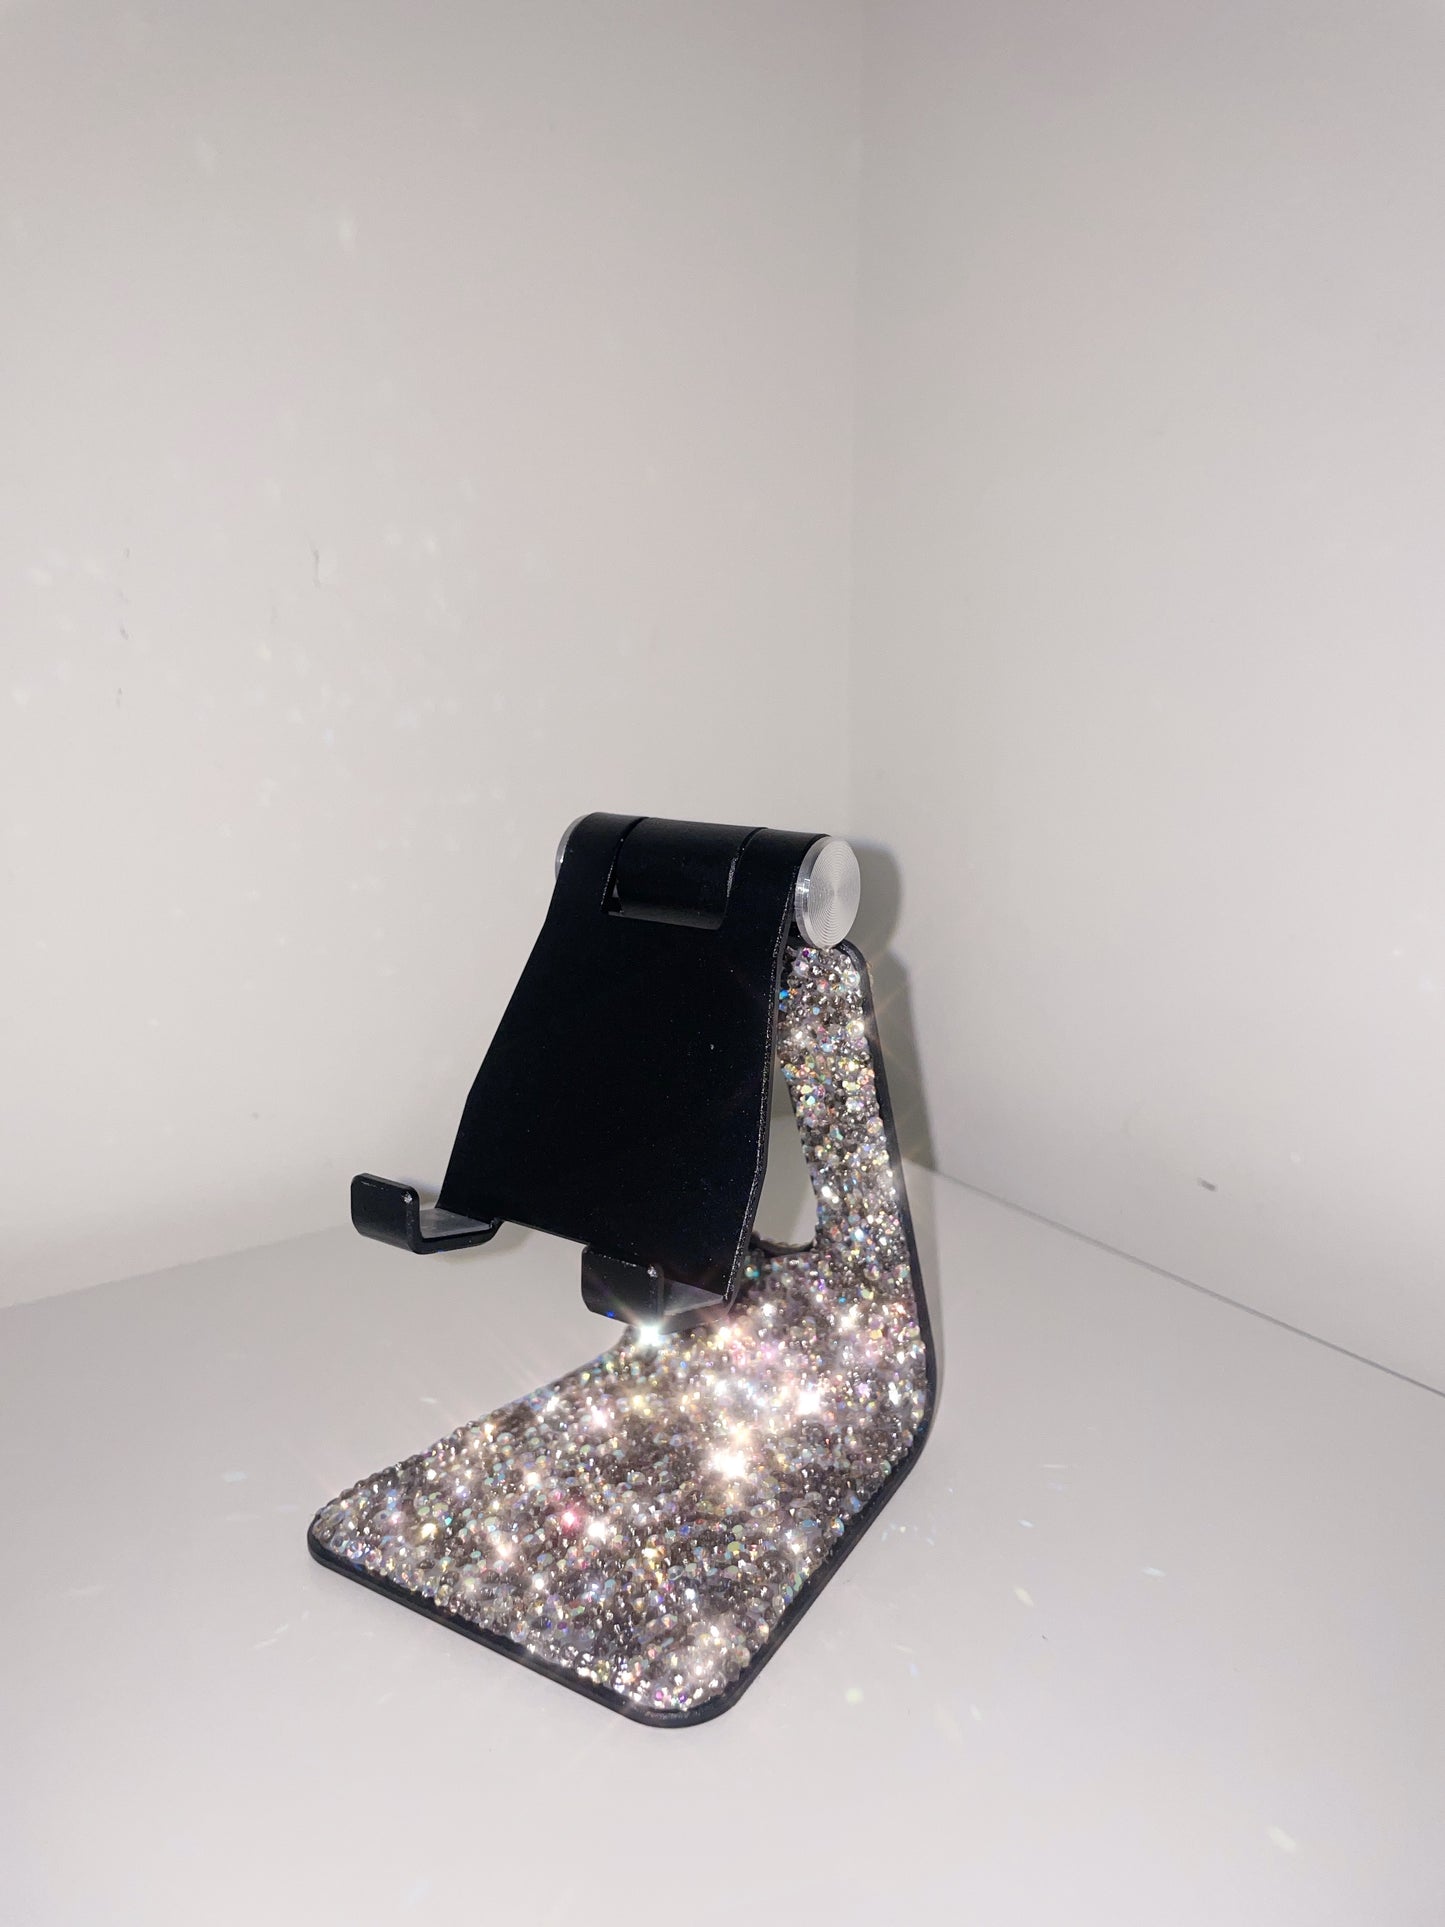 Bling Rhinestone Crystal Adjustable Cell Phone Stand, Phone Holder for Desk, Phone Desktop Holder Stand Compatible with iPhone IPAD Samsung Smart